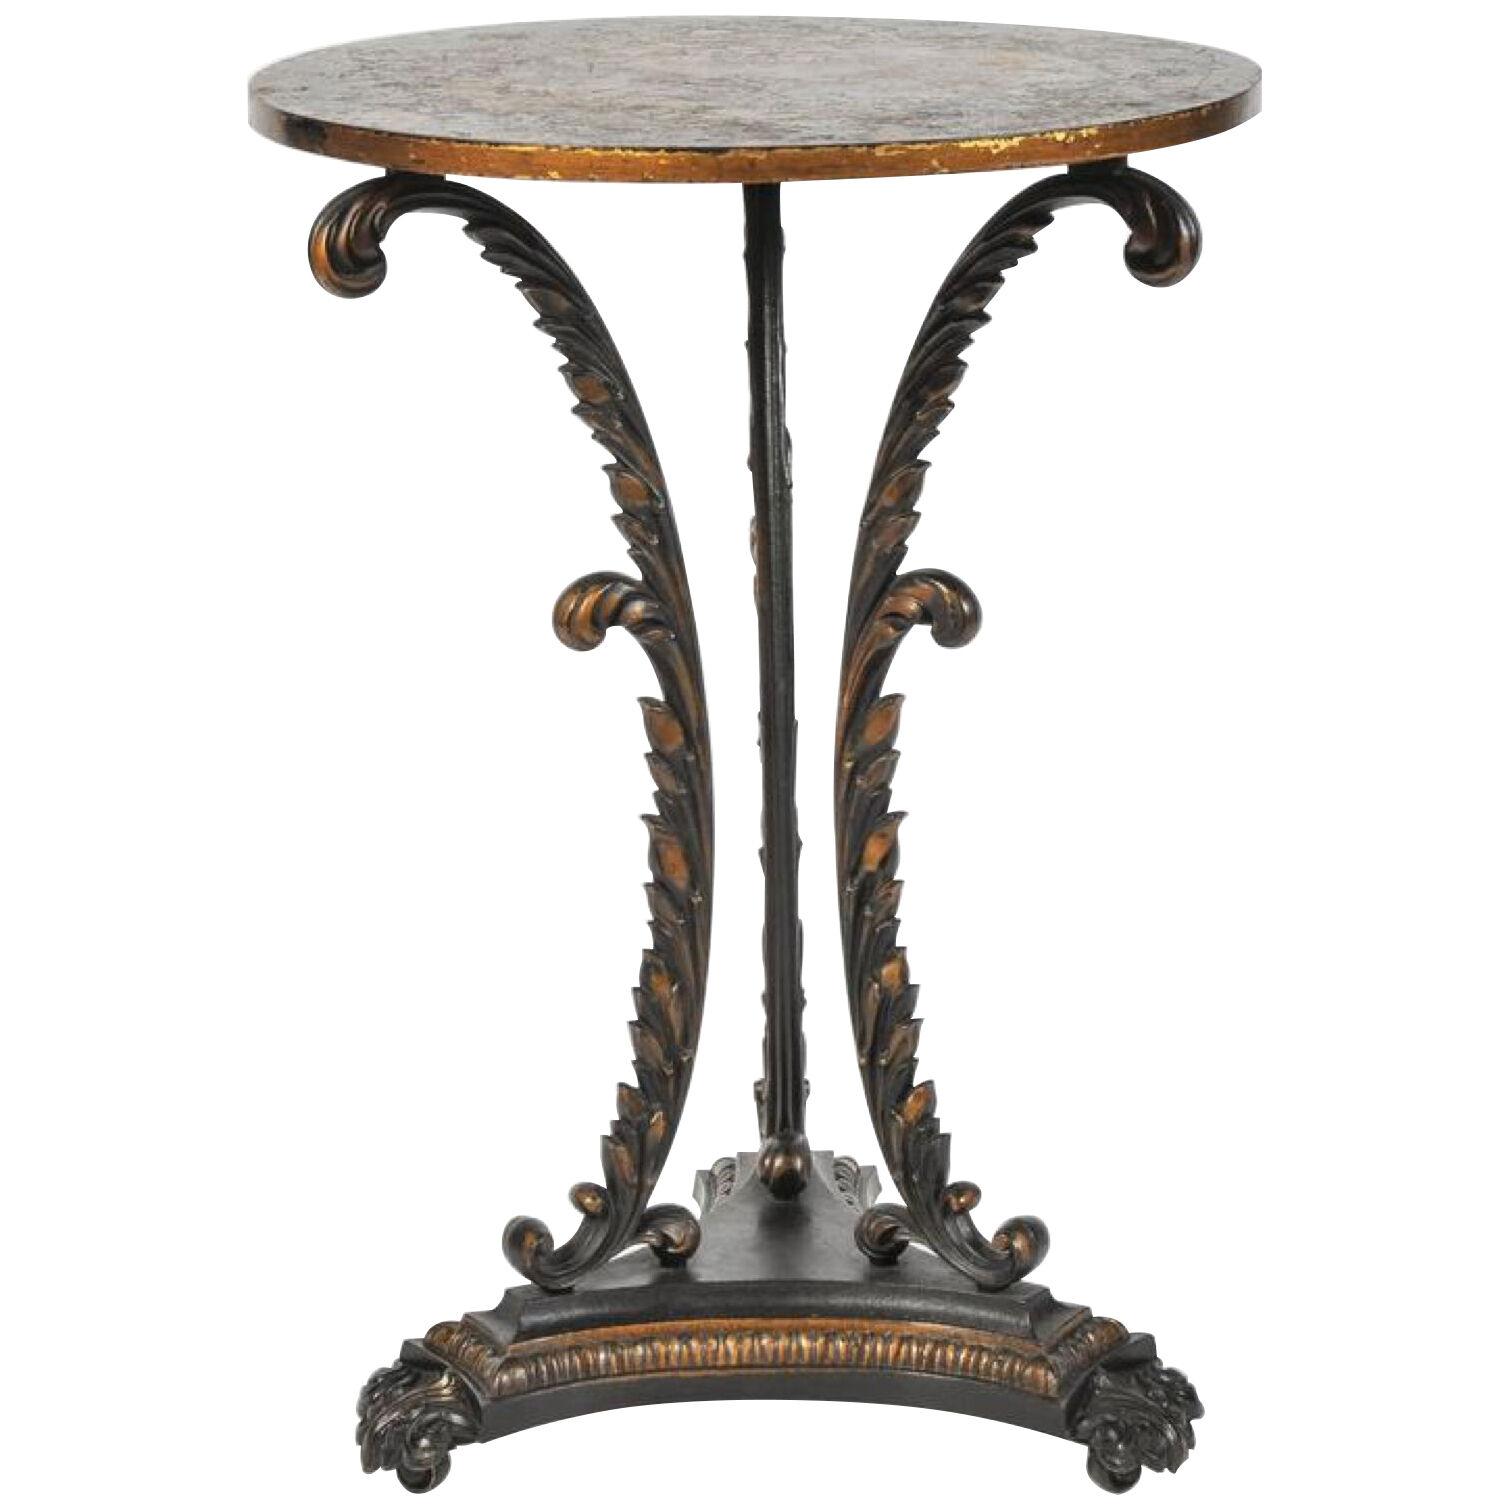 Early 19th Century Iron Tripod Table attributable to Coalbrookdale